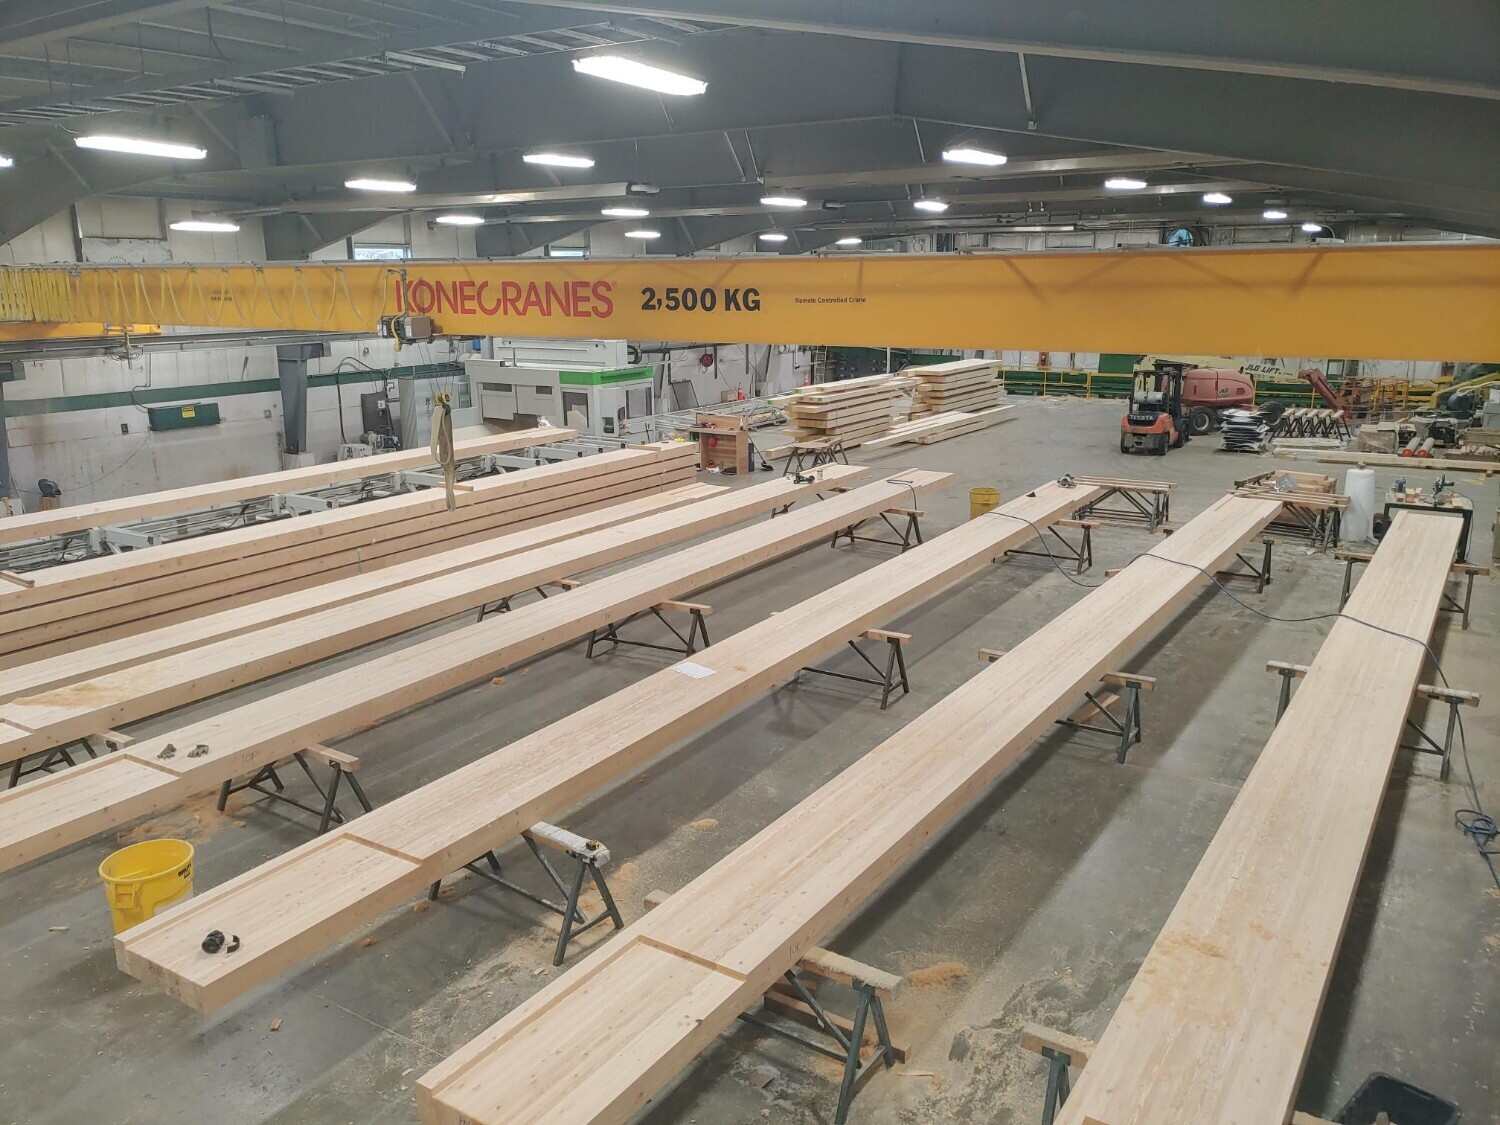 Our exposed Glulam beams are prefabricated at Kalesnikoff's mass timber facility